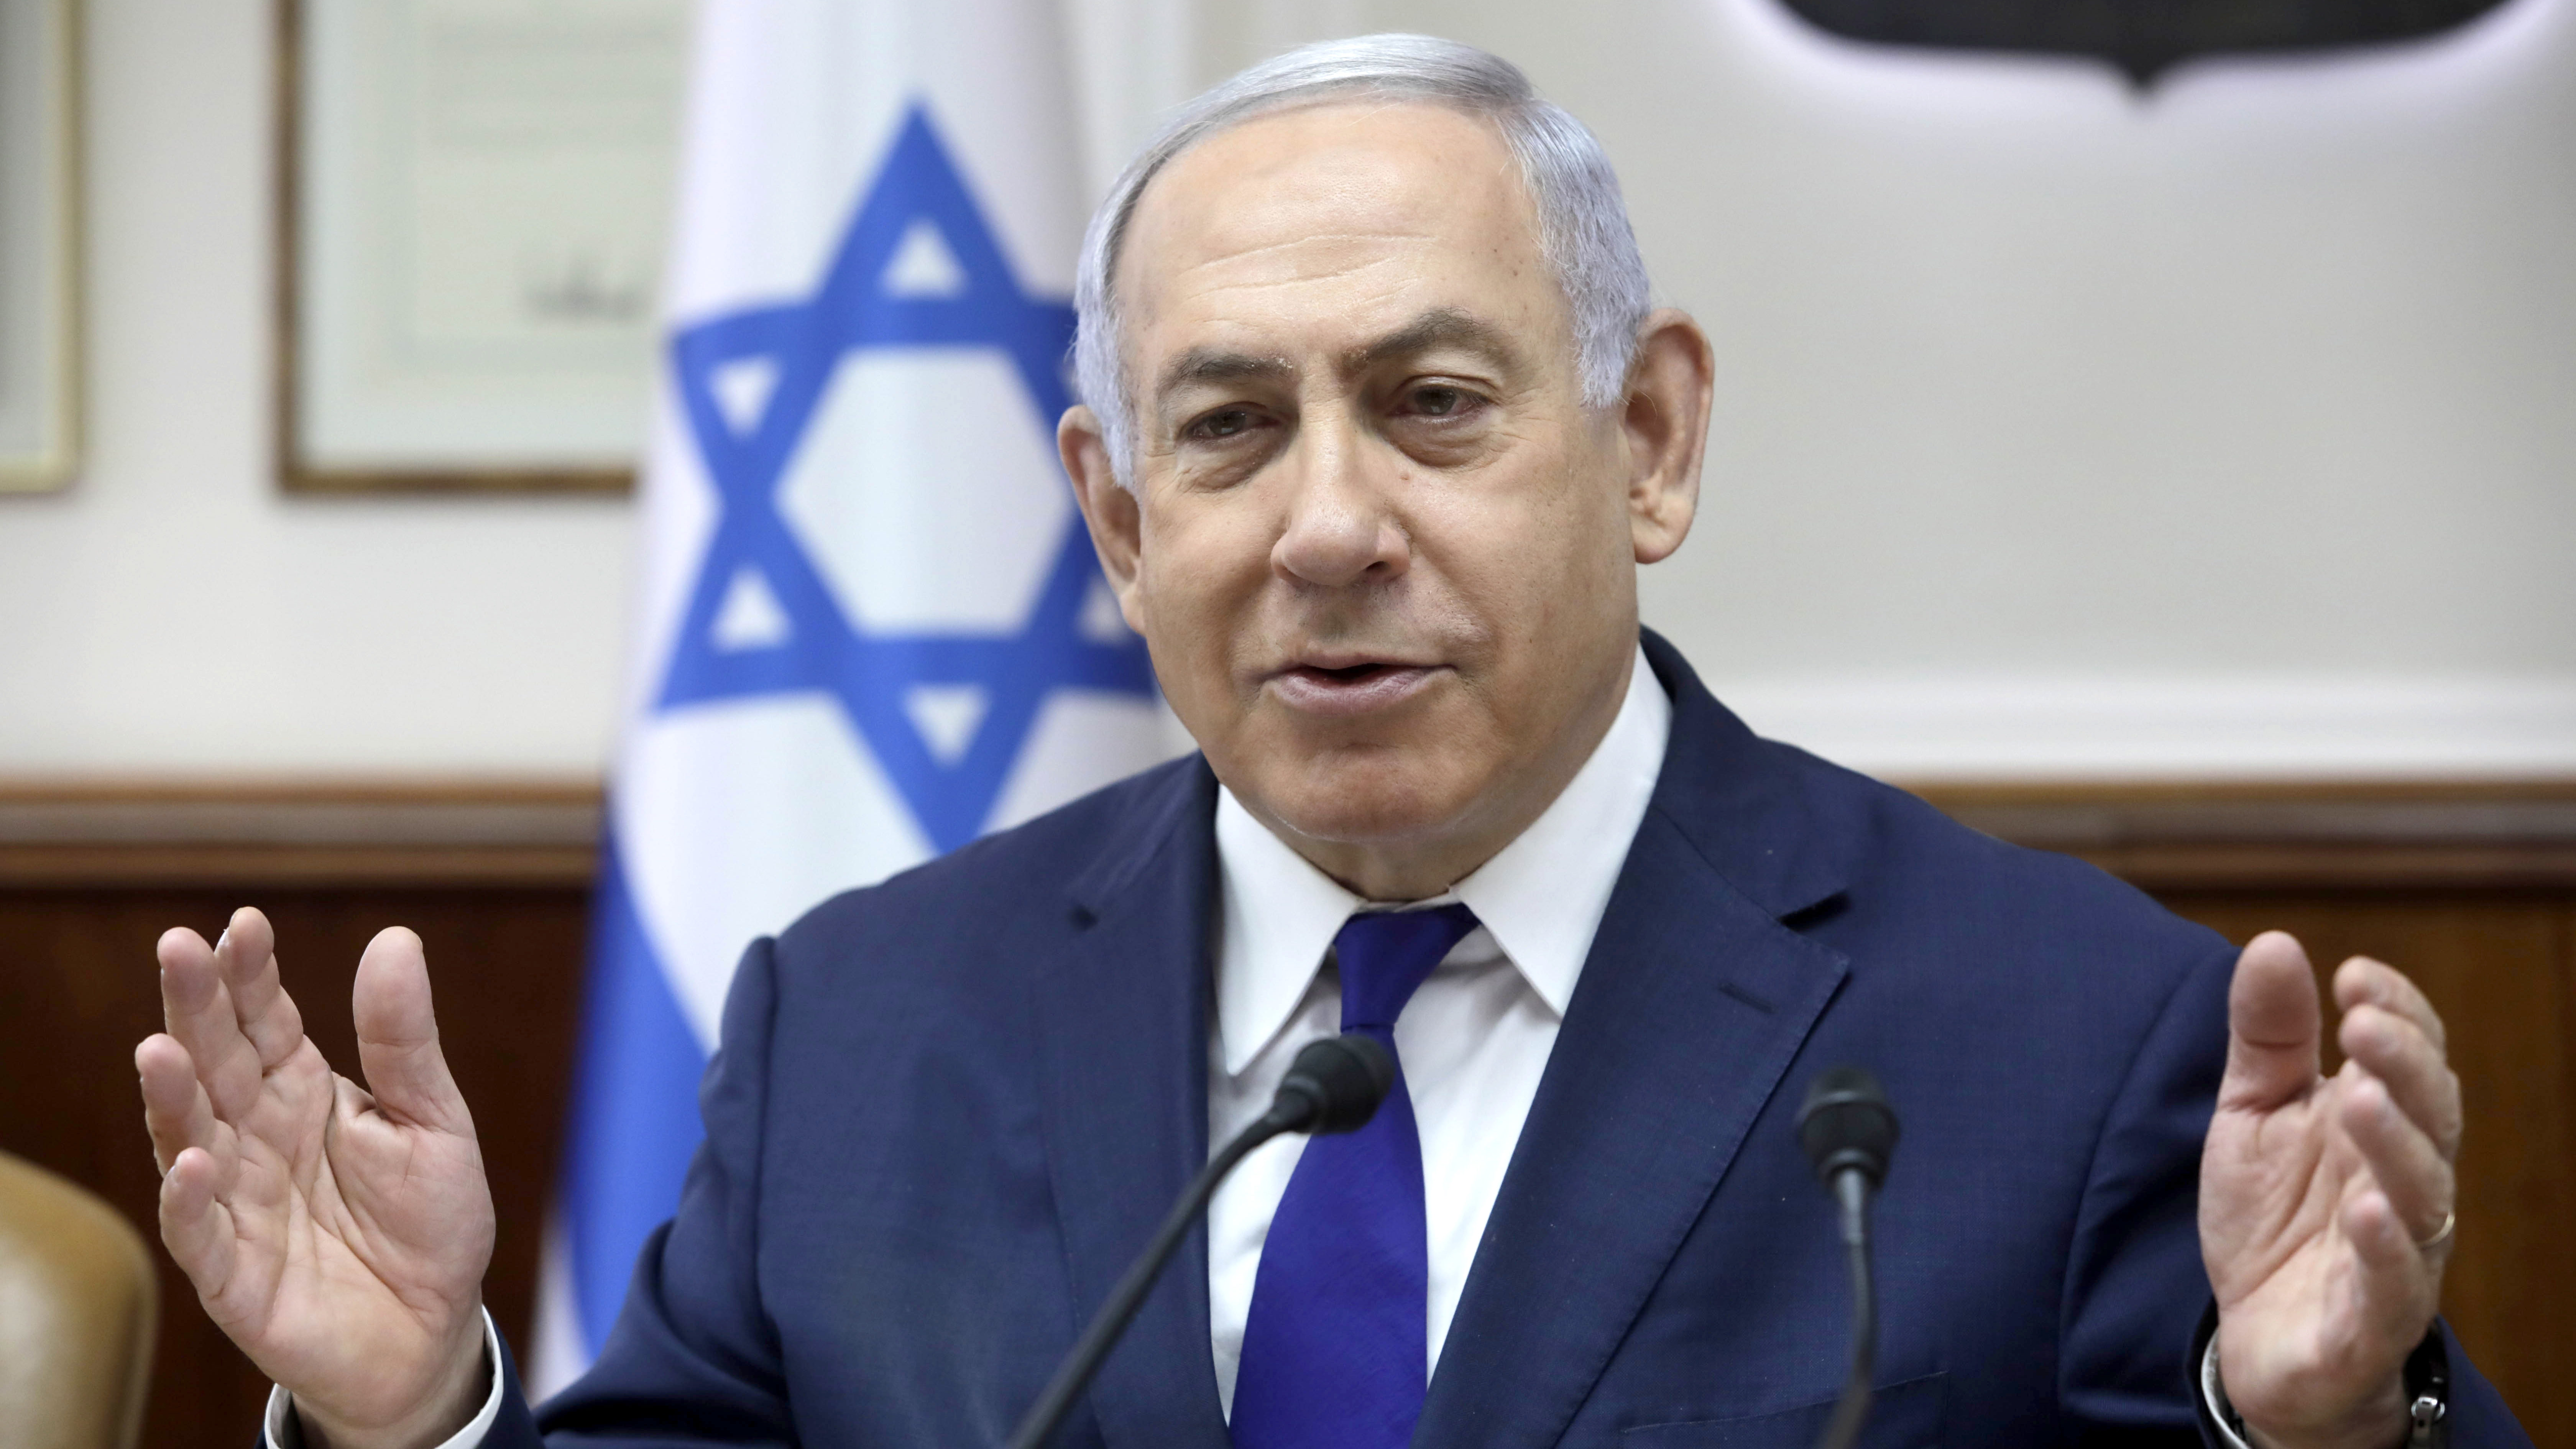 Netanyahu: There has Never Been ‘Real Reconciliation’ with Jordan